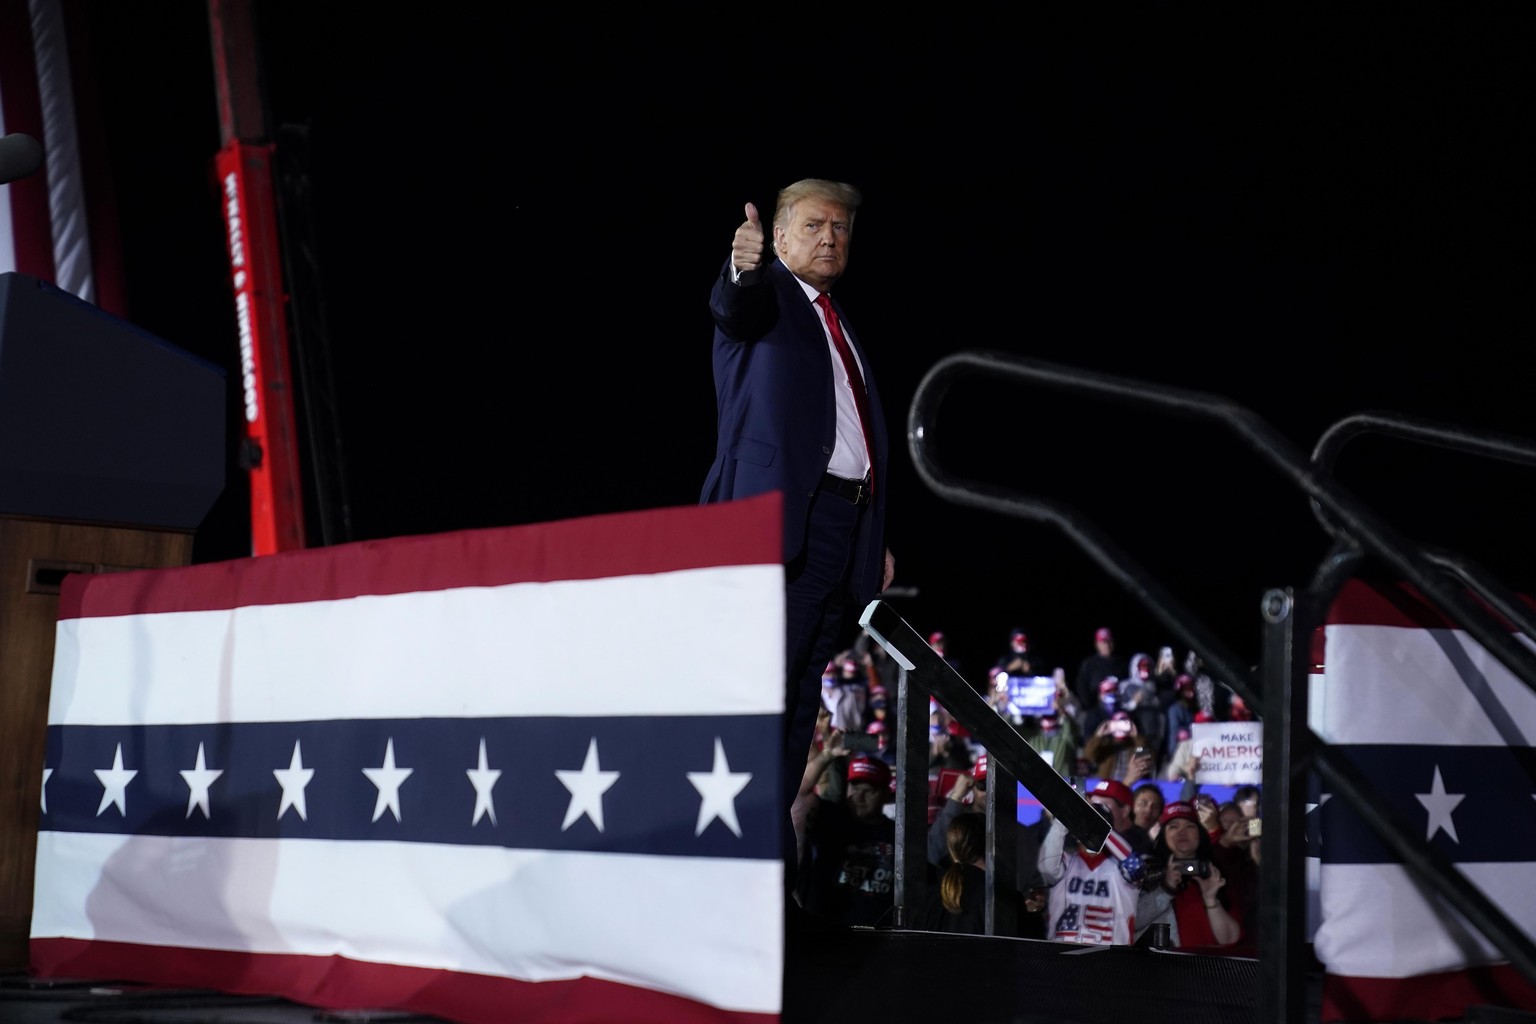 President Donald Trump gives as thumbs up after speaking during a campaign rally at MBS International Airport, Thursday, Sept. 10, 2020, in Freeland, Mich. (AP Photo/Evan Vucci)